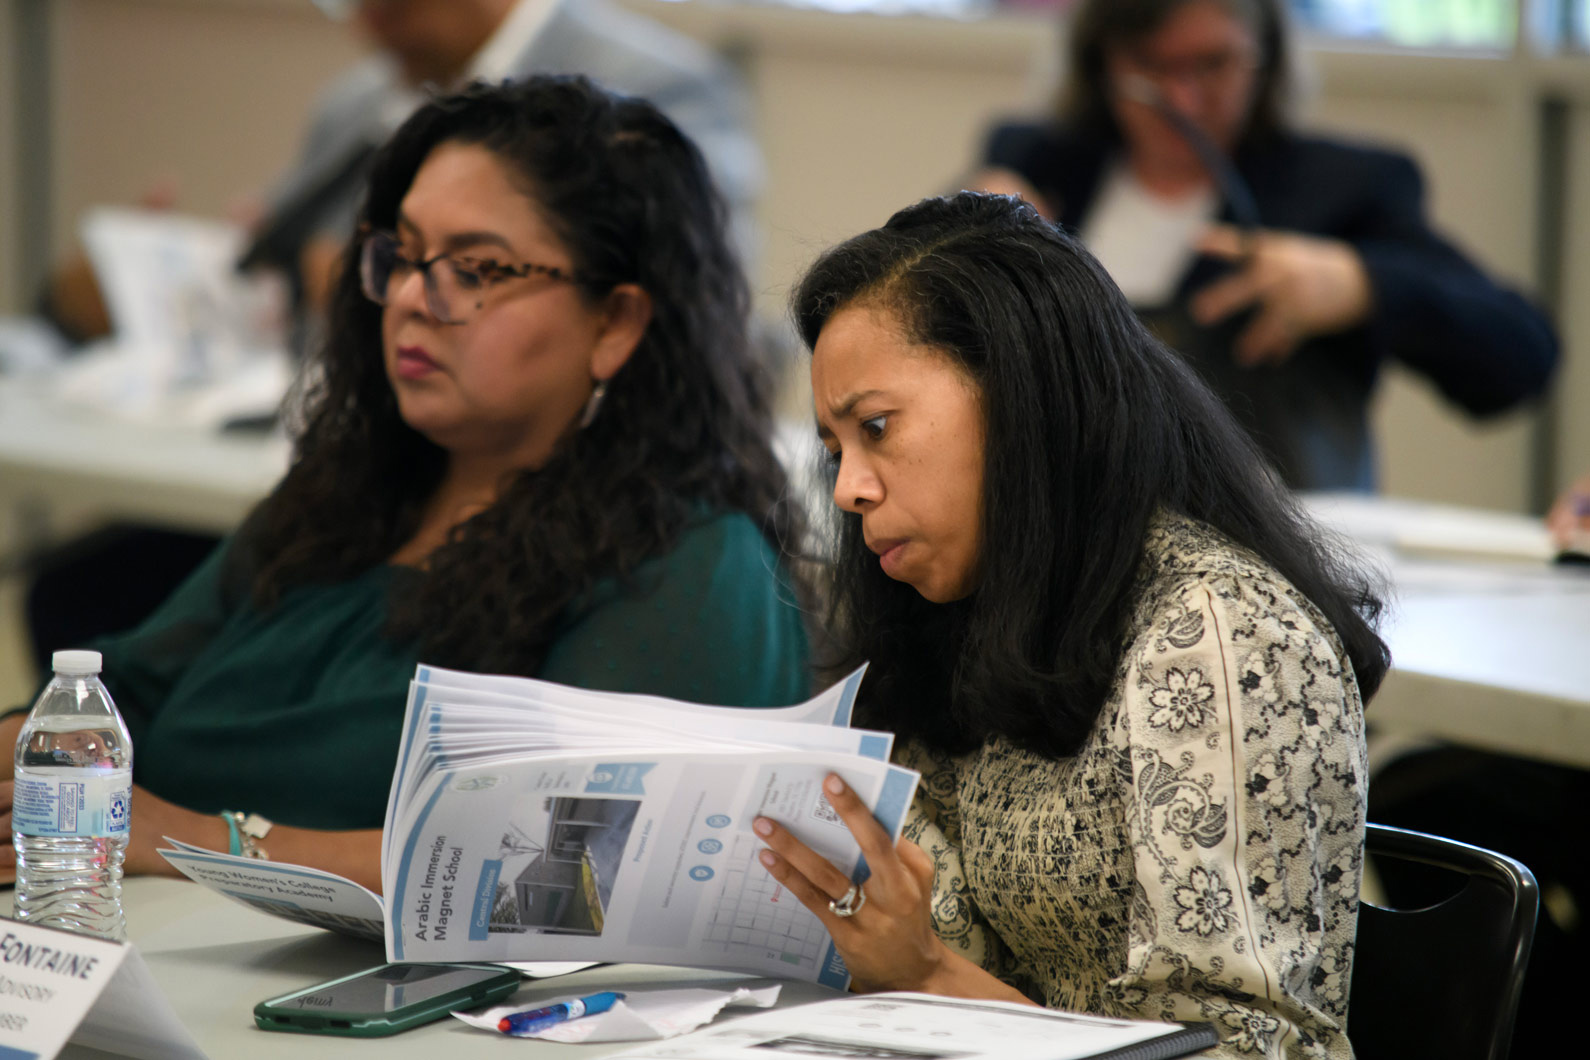 ‘A large amount of money’: HISD bond committee questions $425 million for career centers